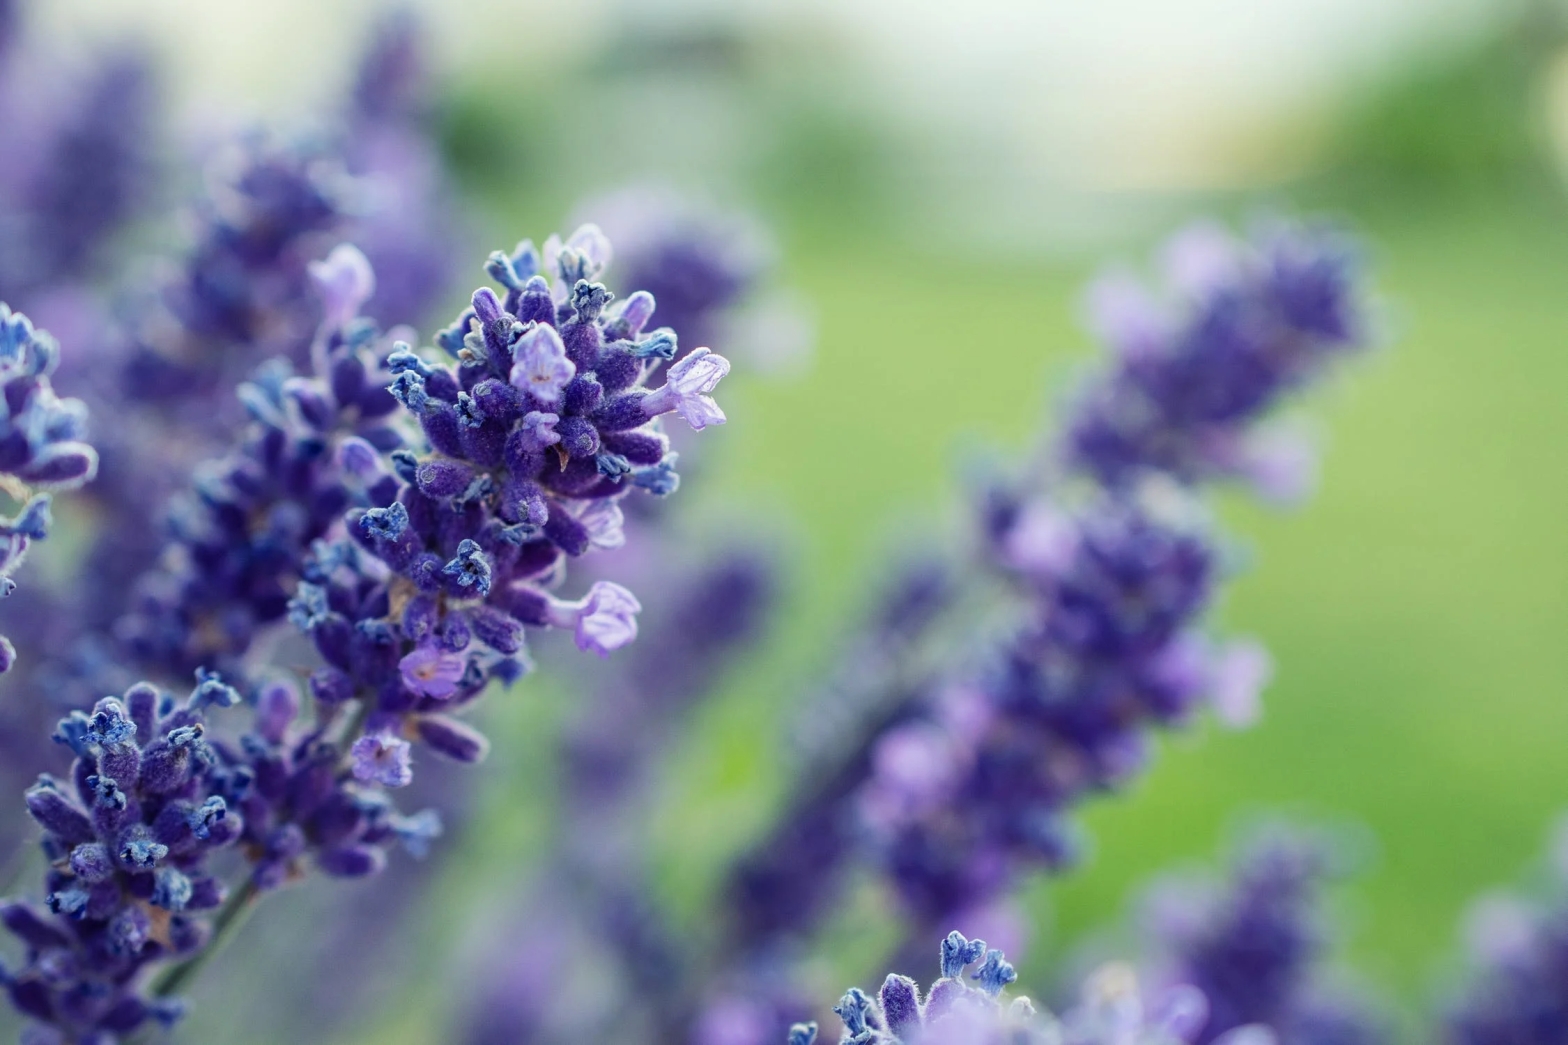 Ancient Word of the Day: Lavender